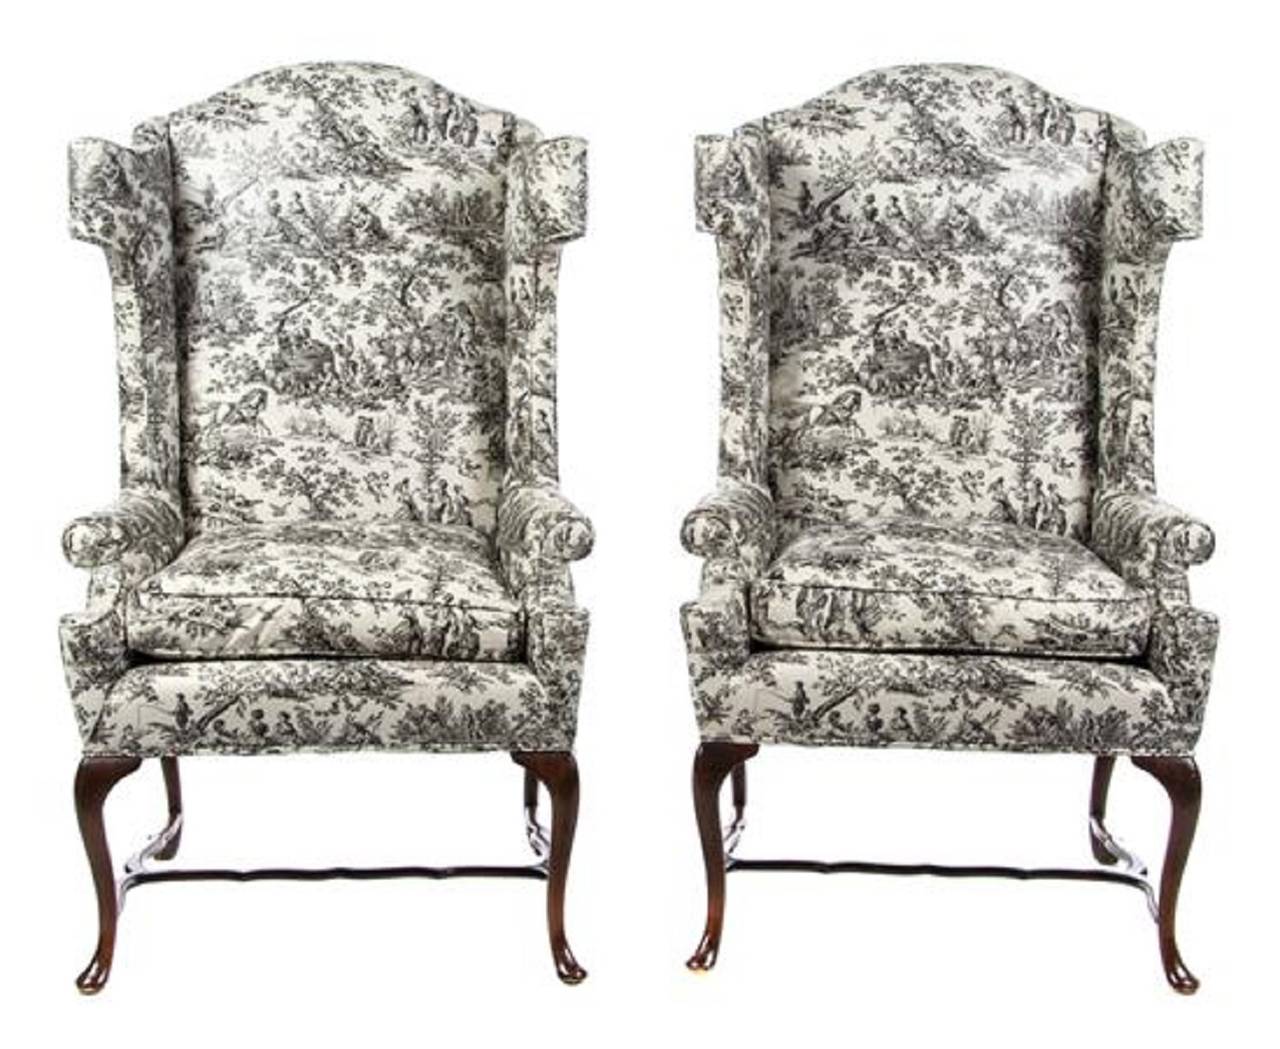 A pair of George III style wingback armchairs, Early 20th century. Each with glazed chintz toile upholstery, raised on cabriole legs joined by stretchers.